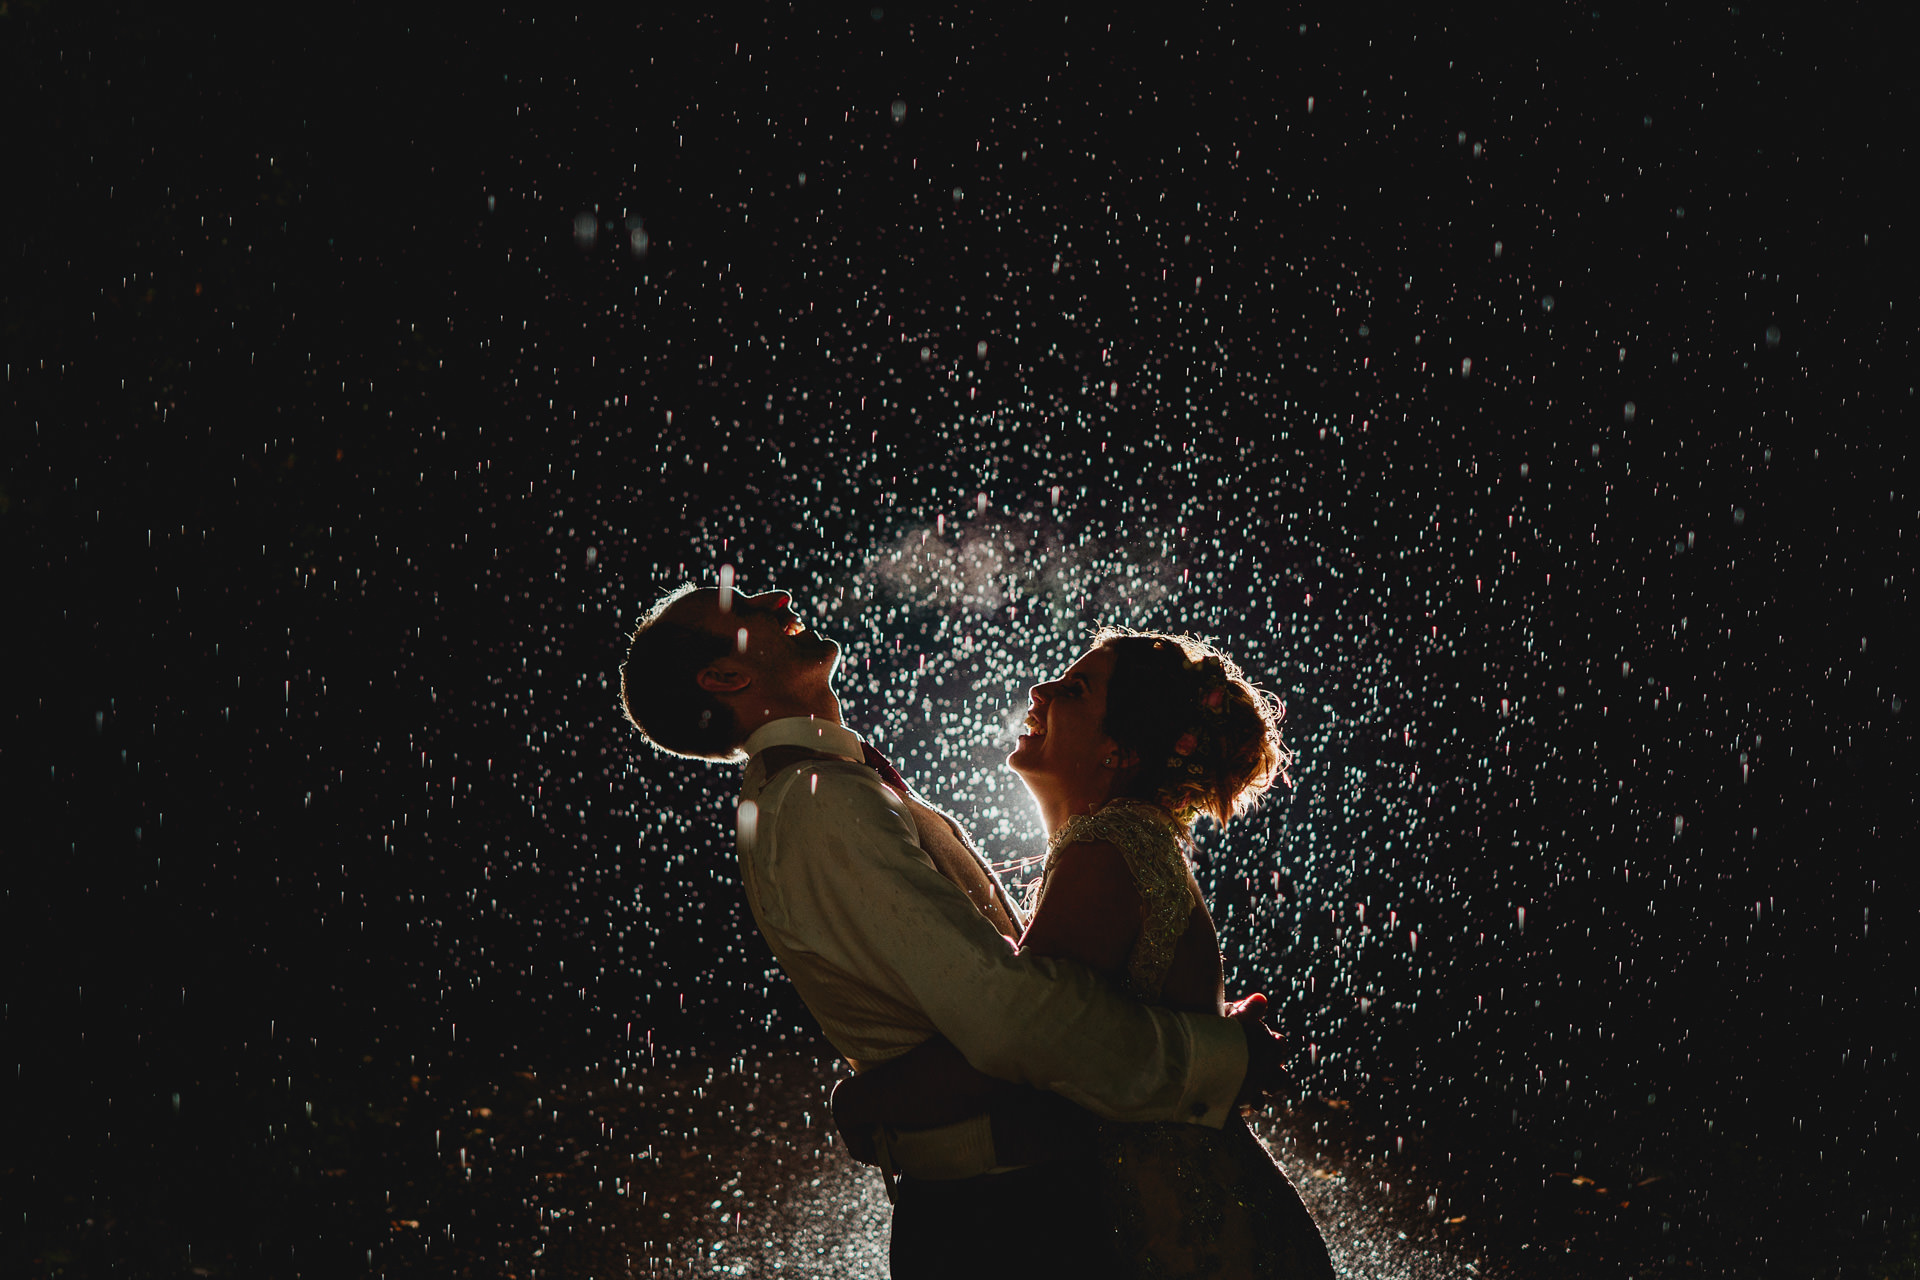 Bride and groom laughing in the rain together at night